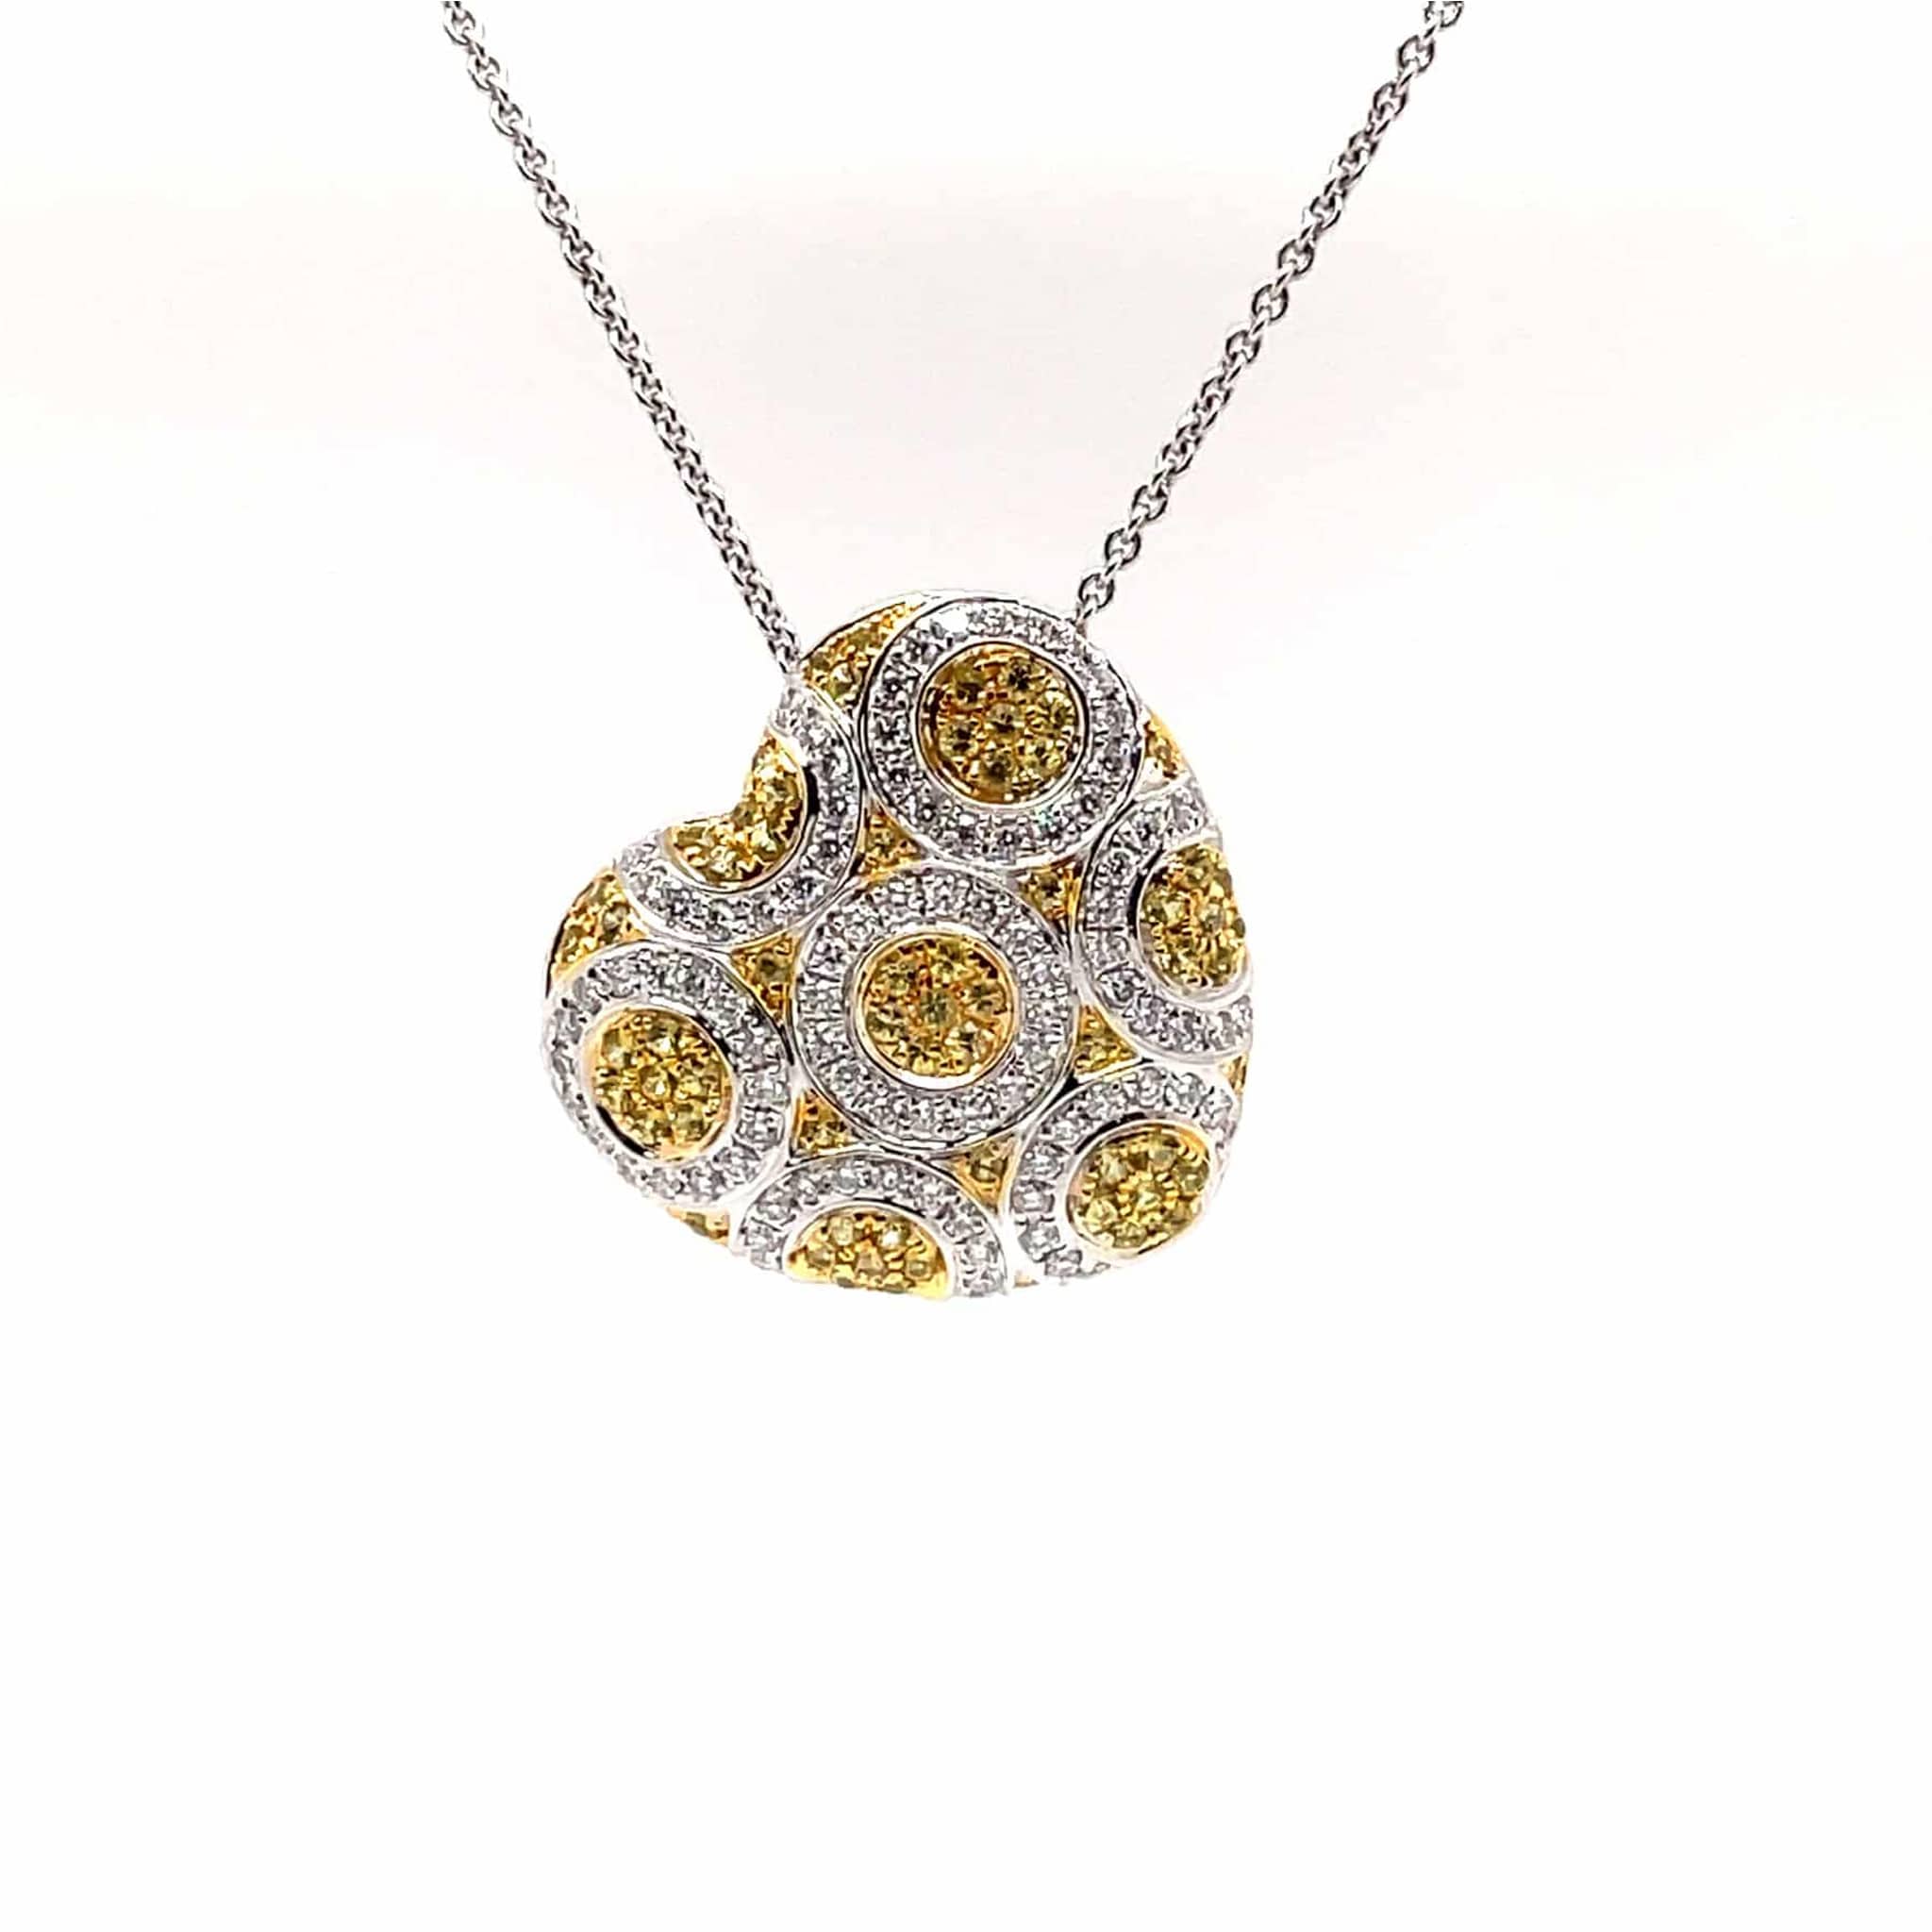 Heart Shaped Pendant in 18K White Gold with Yellow Sapphires and Diamonds